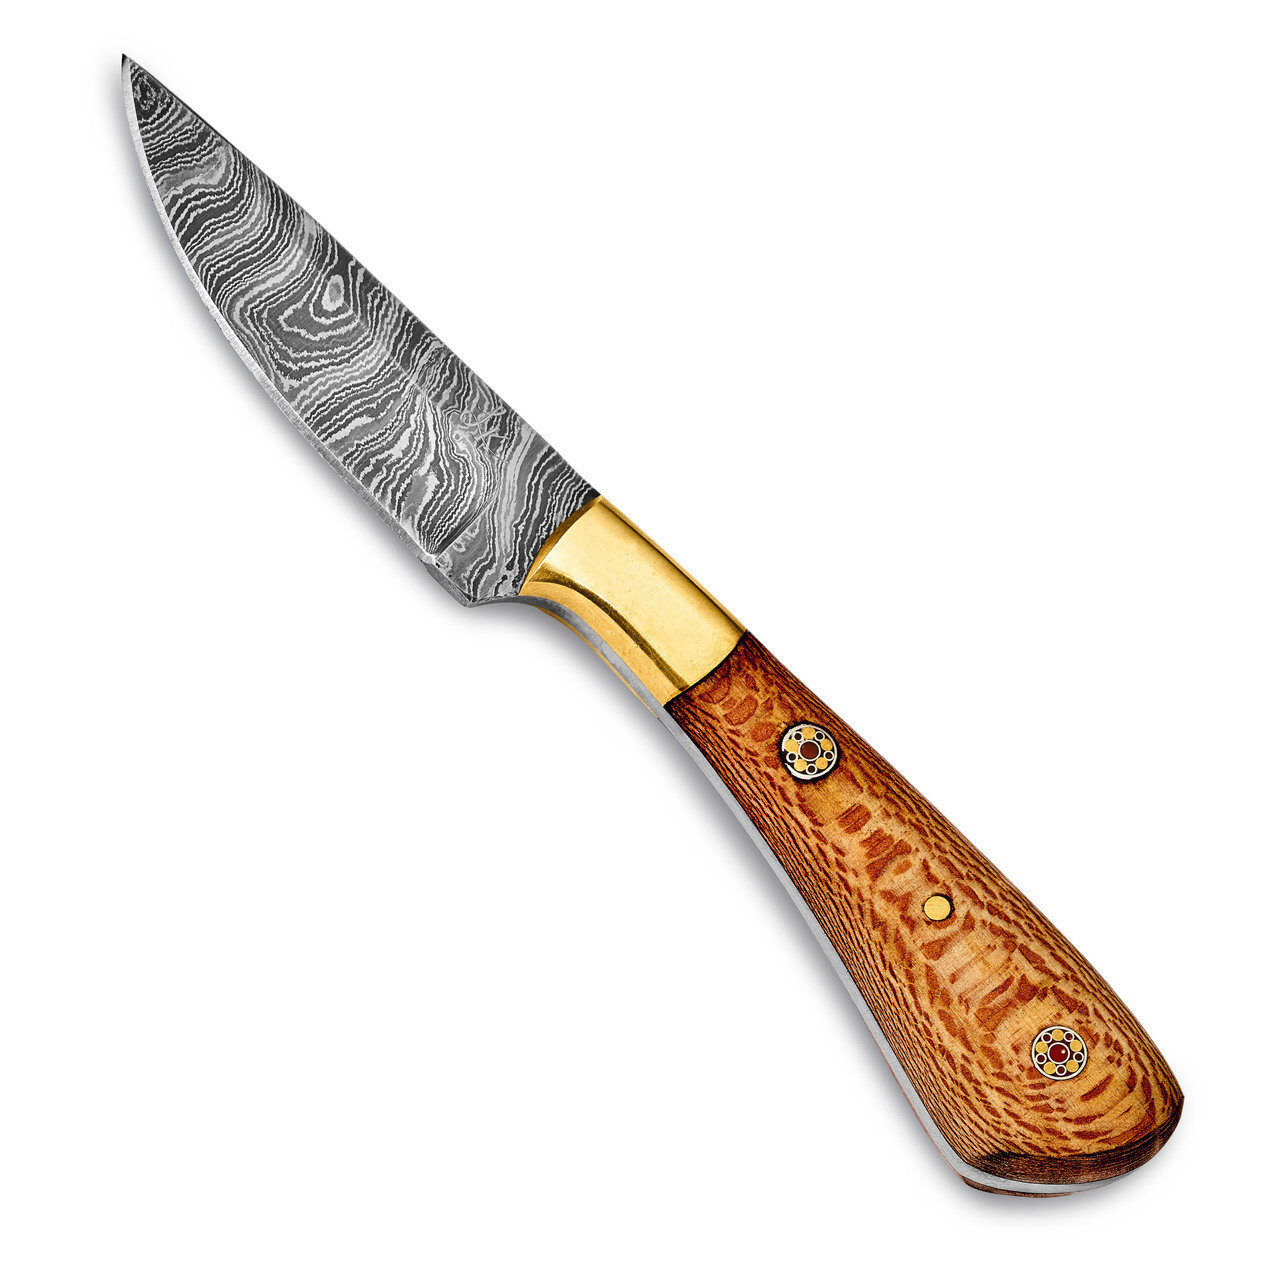 Blade Chinar Wood Mosaic Pin Handle Knife Damascus Steel 256 Layer Fixed by Jere